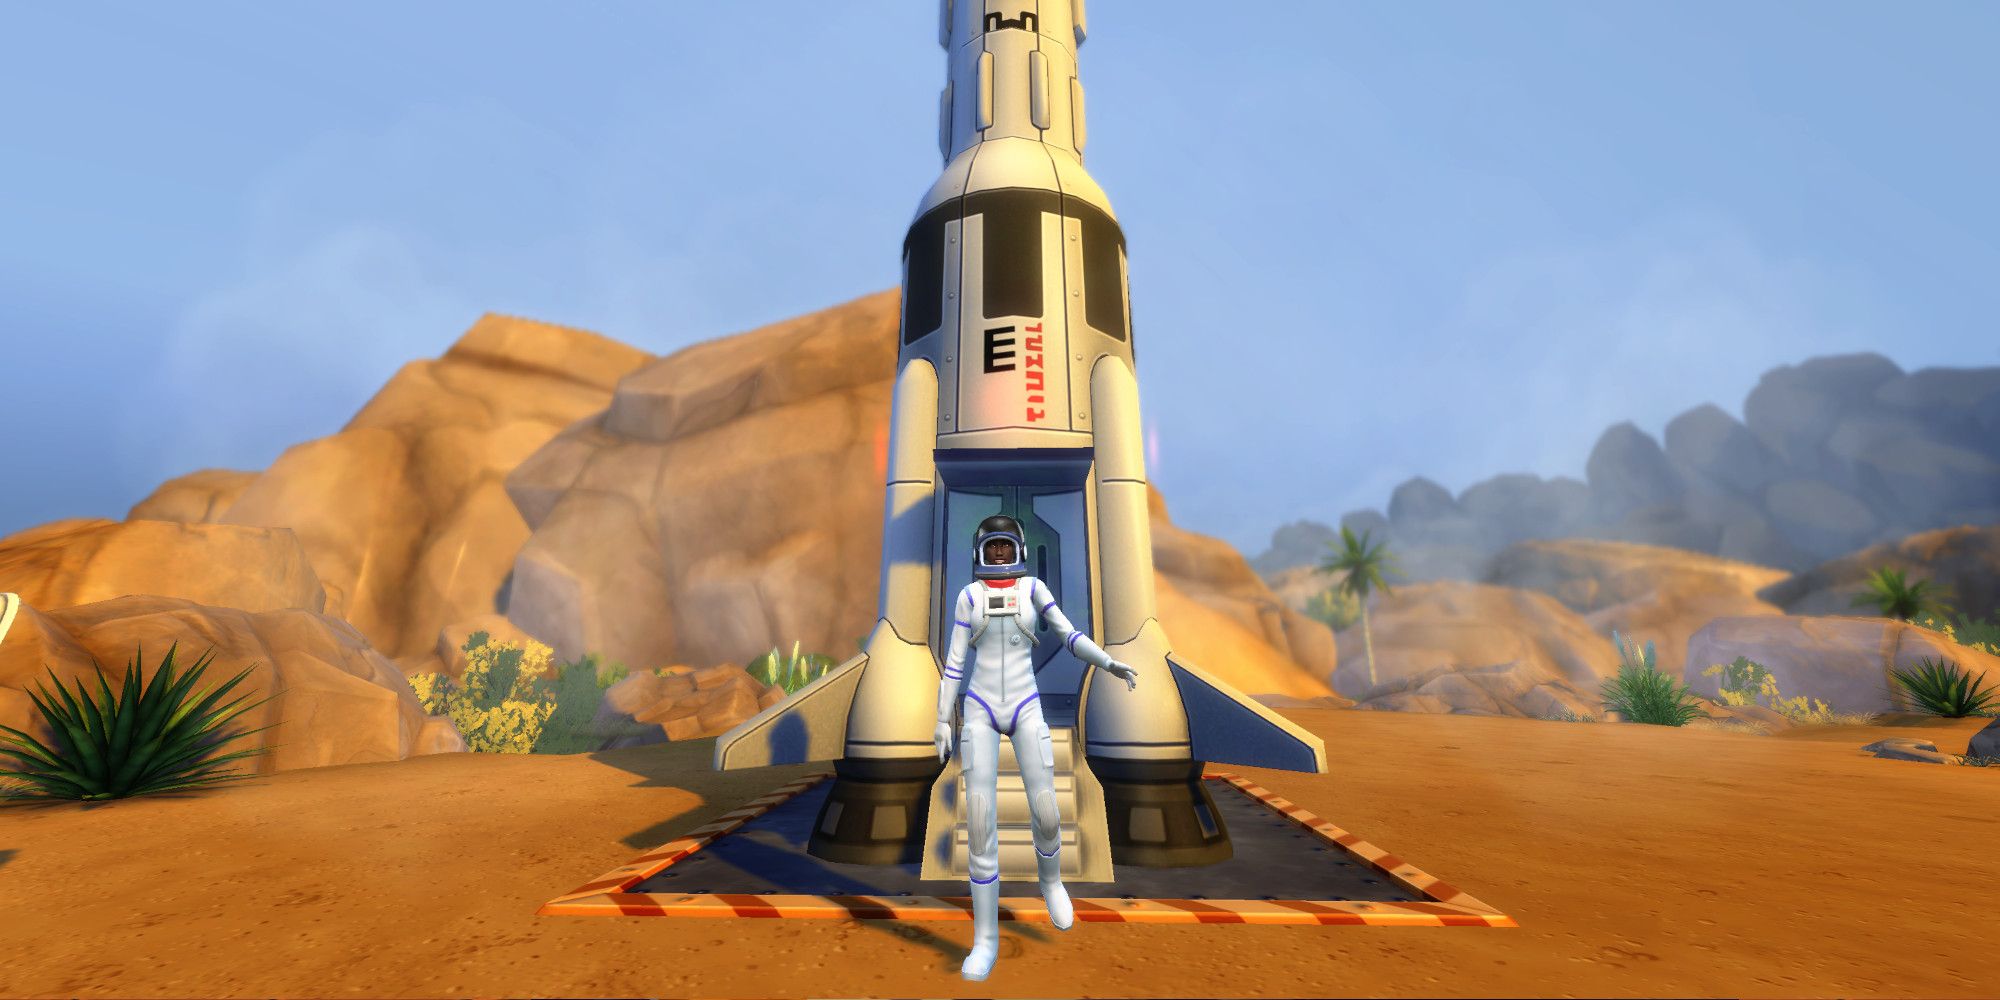 Sims from The Sims 4 in an astronaut suit exiting a rocket ship in the desert